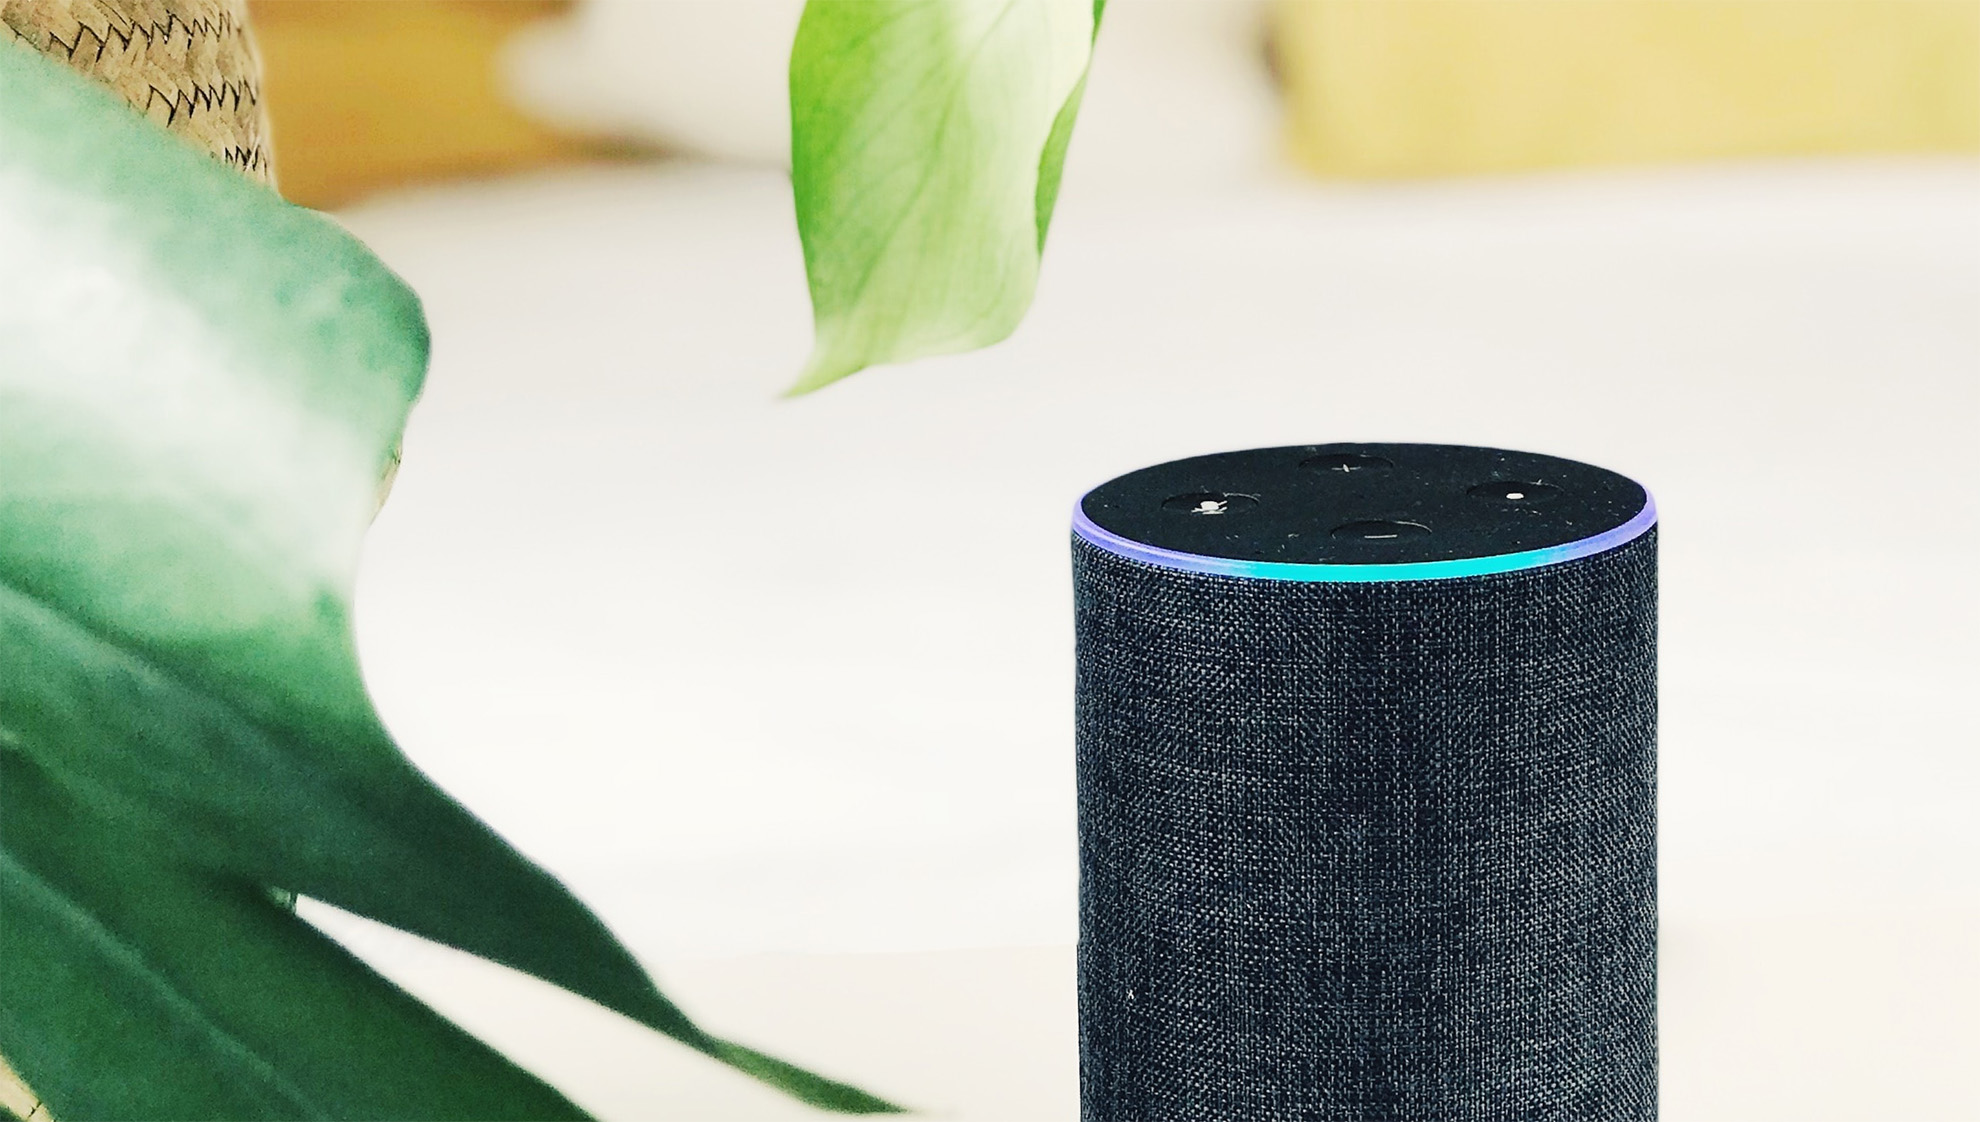 Alexa, How Can Retailers Compete?